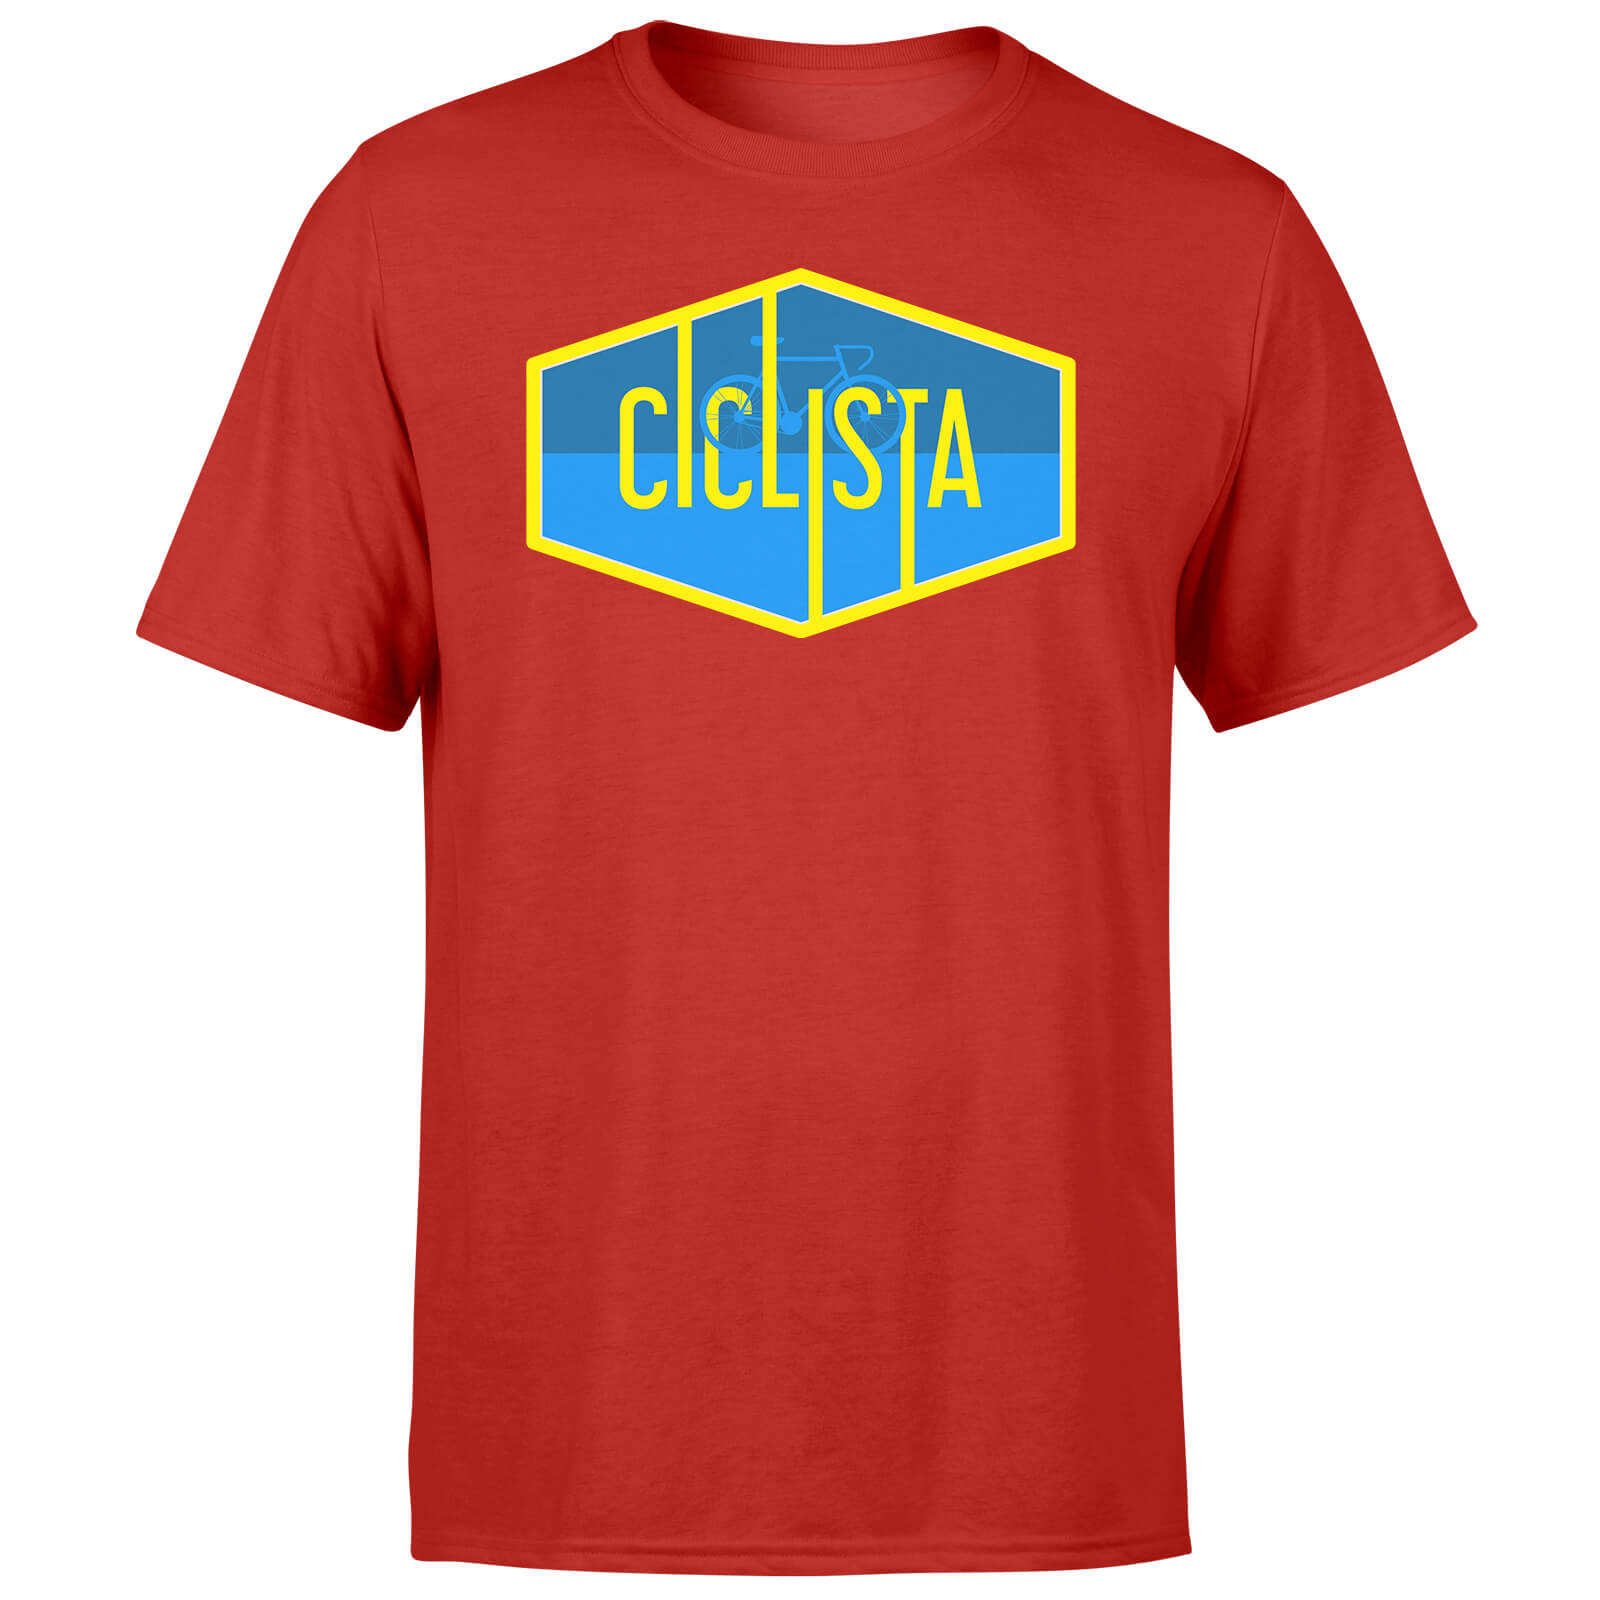 Ciclista Men's Red T-Shirt - S